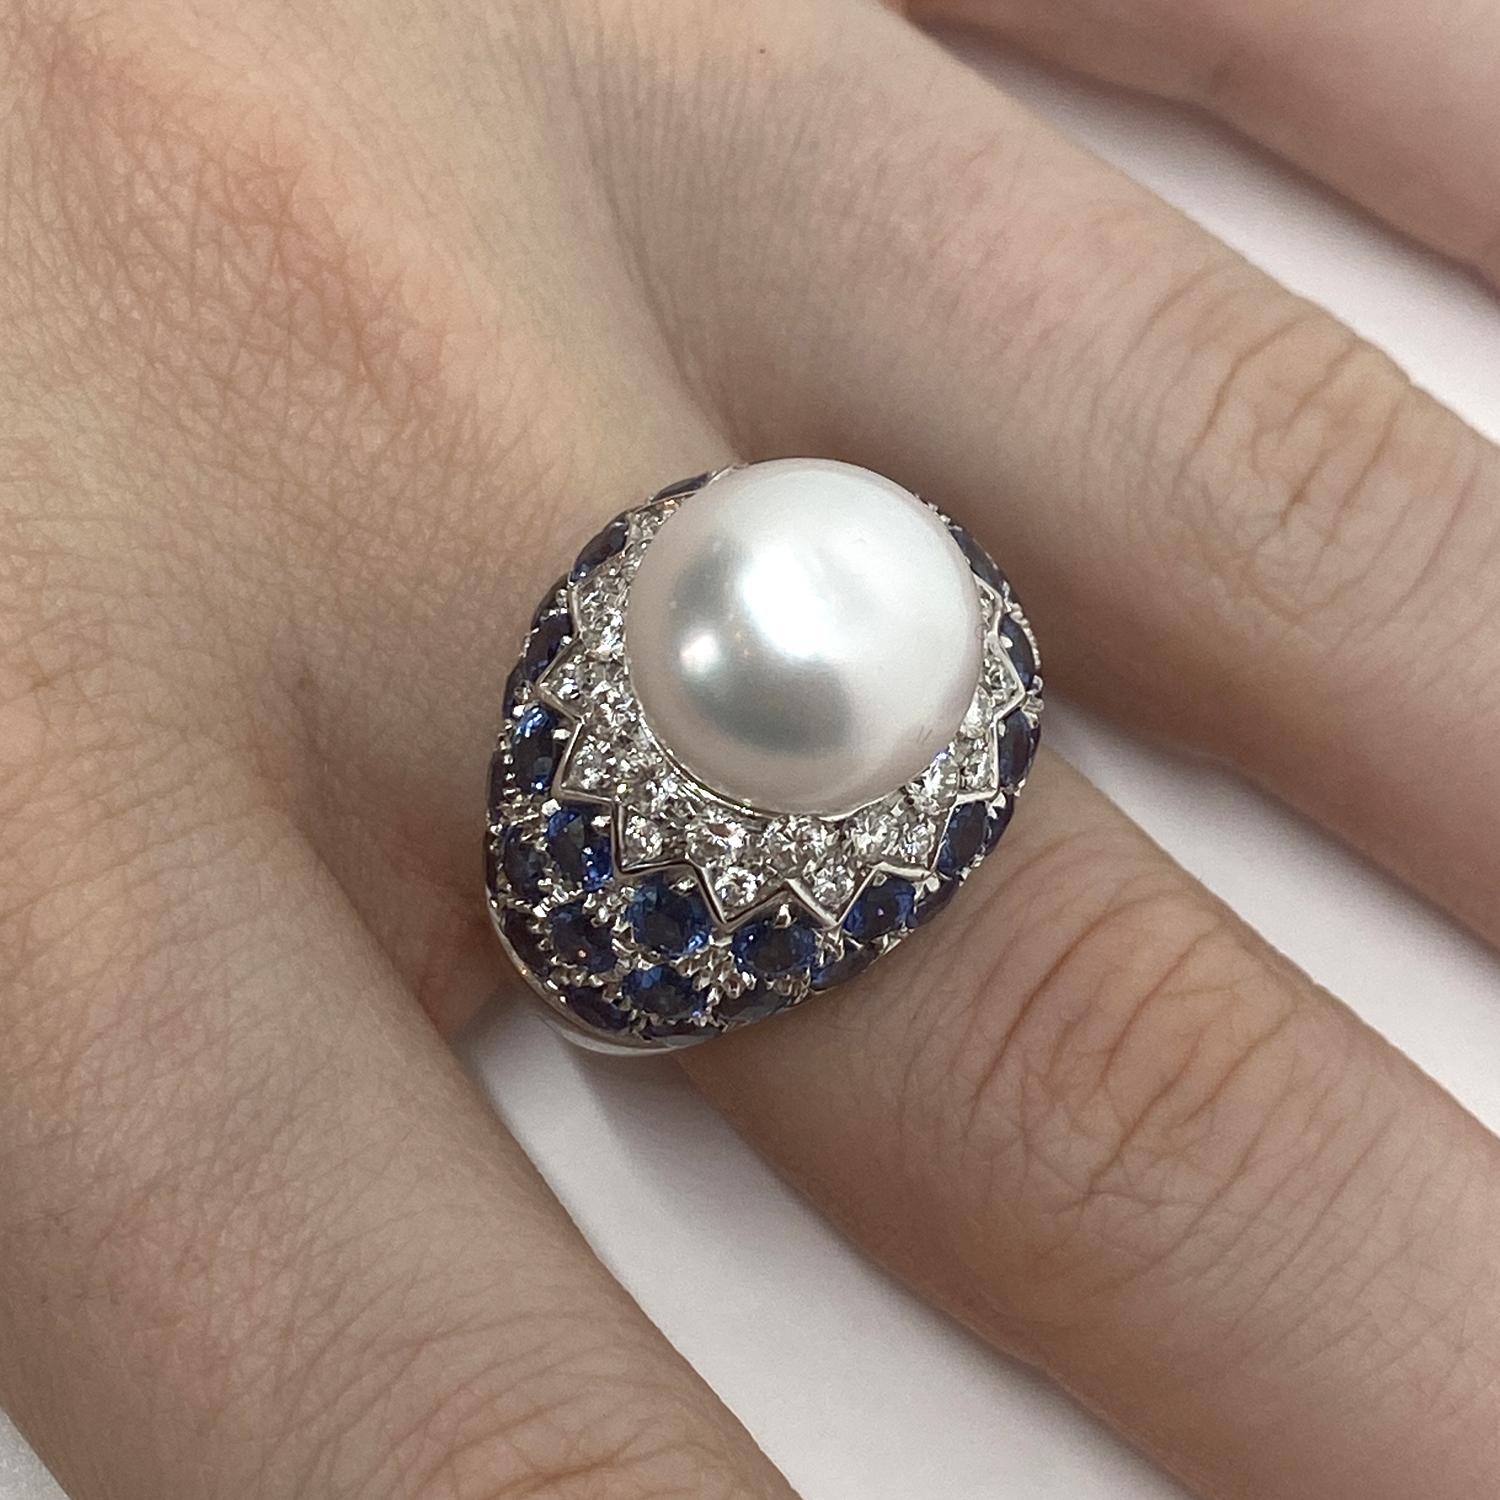 Ring made of 18kt white gold with white pearl and brilliant-cut natural white diamonds for ct.0.78 and brilliant-cut blue sapphires for ct.5.95

Welcome to our jewelry collection, where every piece tells a story of timeless elegance and unparalleled